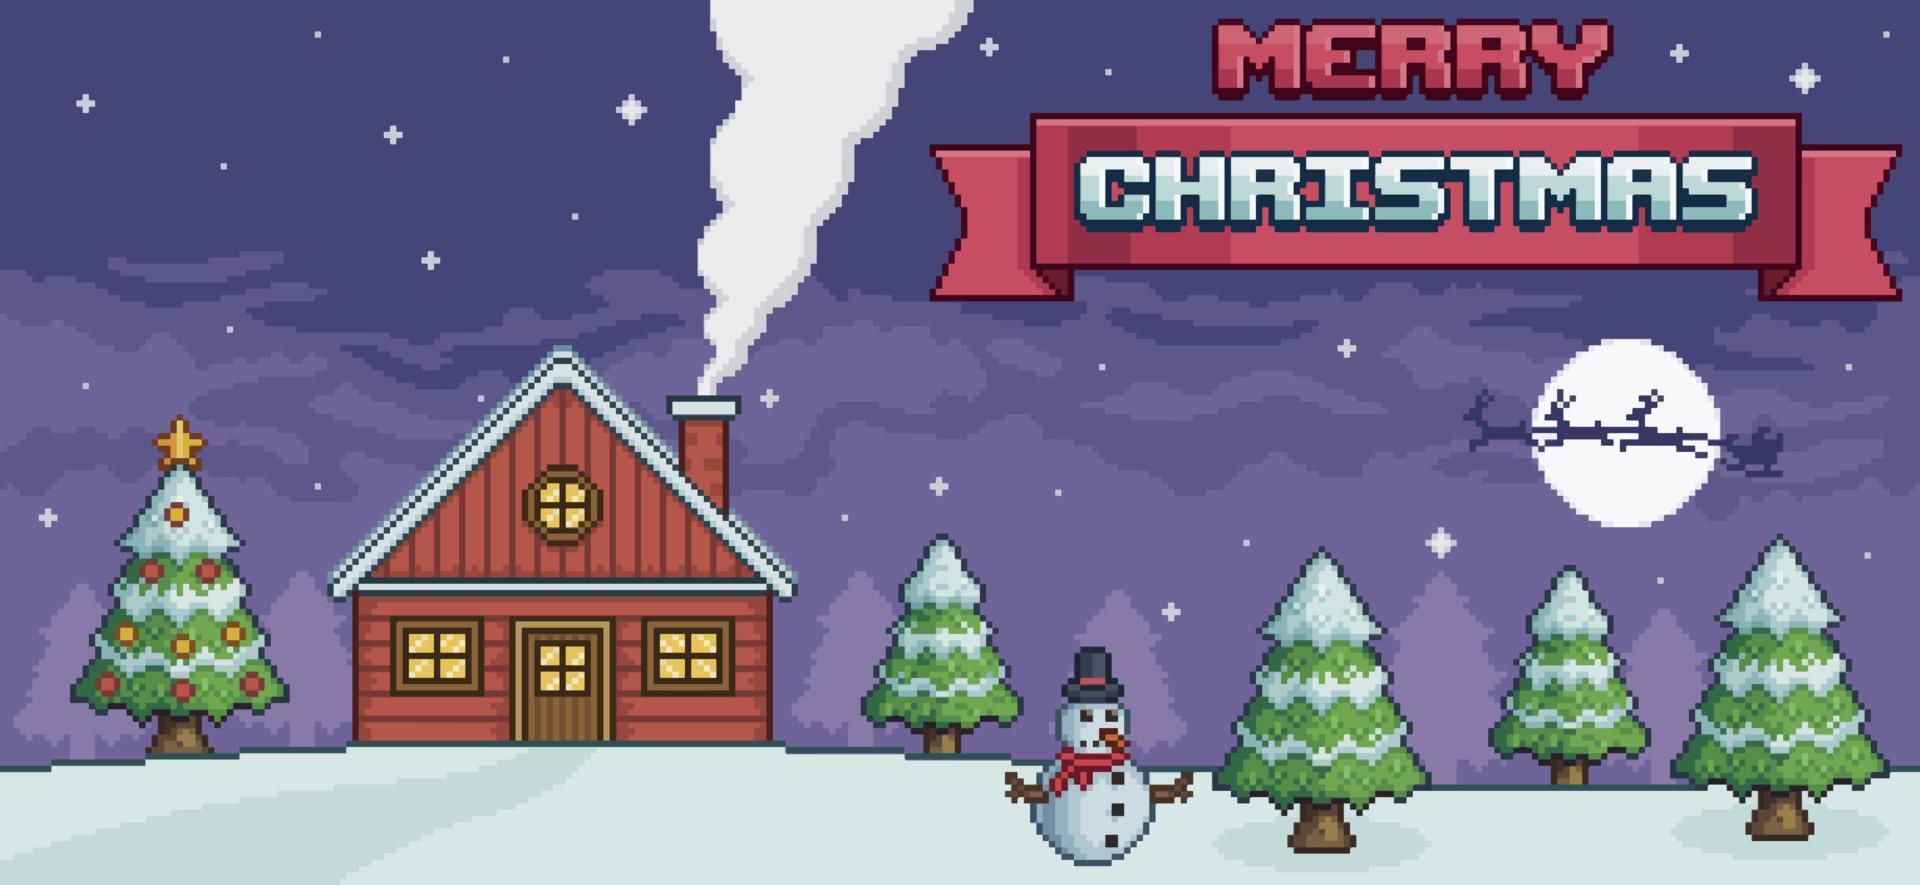 Pixel art christmas landscape at night with red house, christmas tree, snowman, santa claus, pine trees and snow 8 bit game background vector